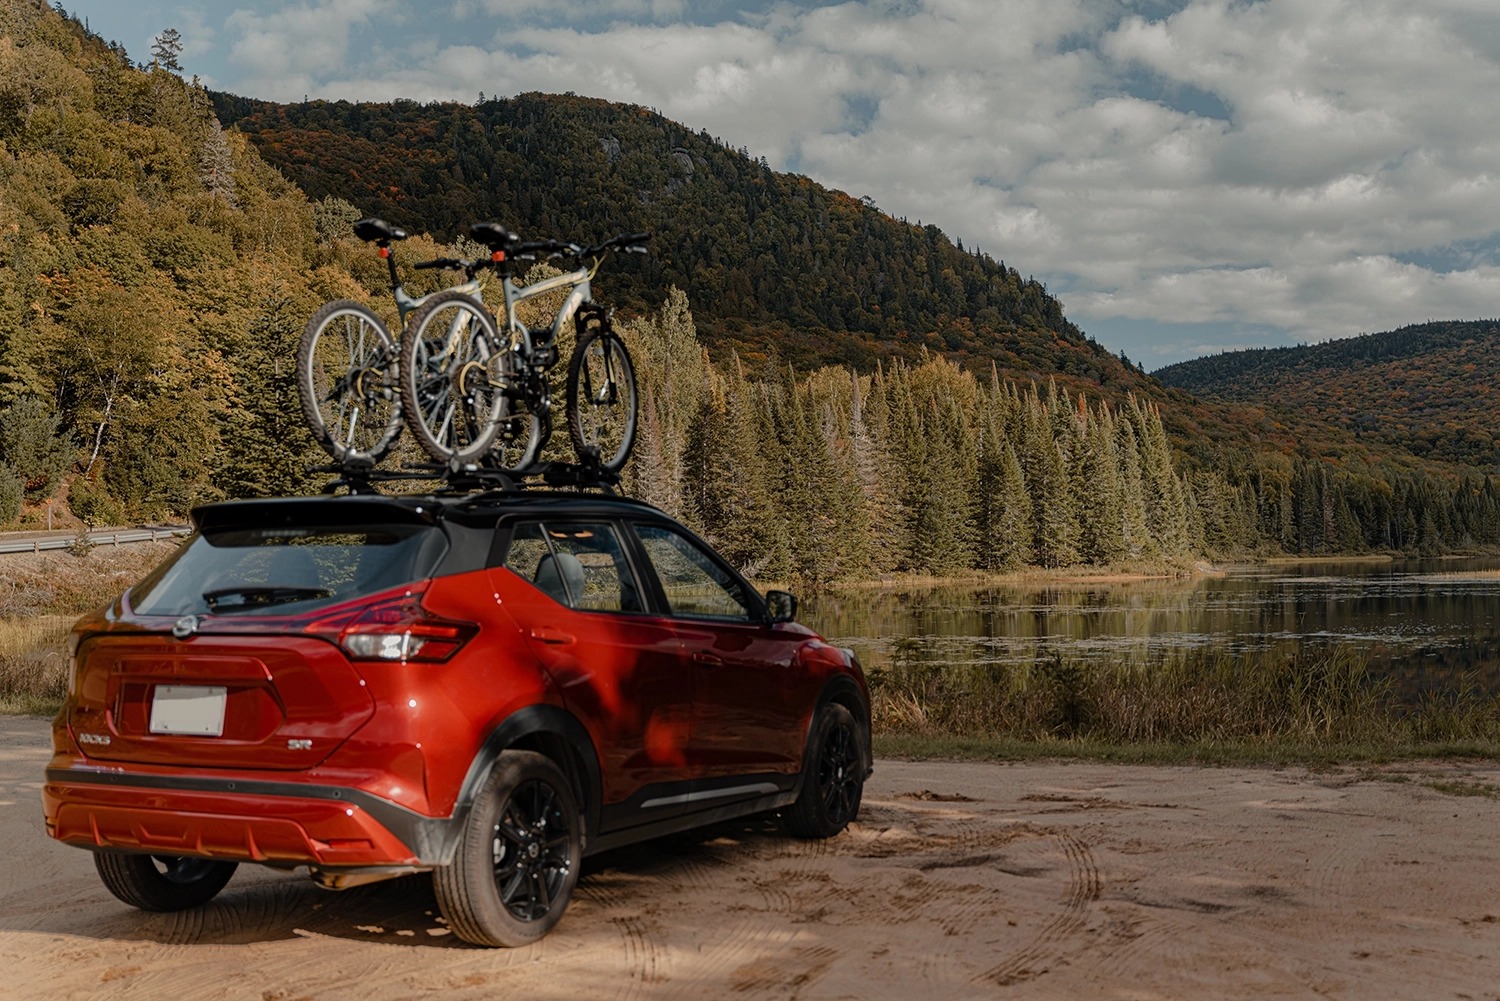 2023 red nissan kicks sub compact suv crossover rack accessories for bicycles rear view near lake st-jean in saguenay